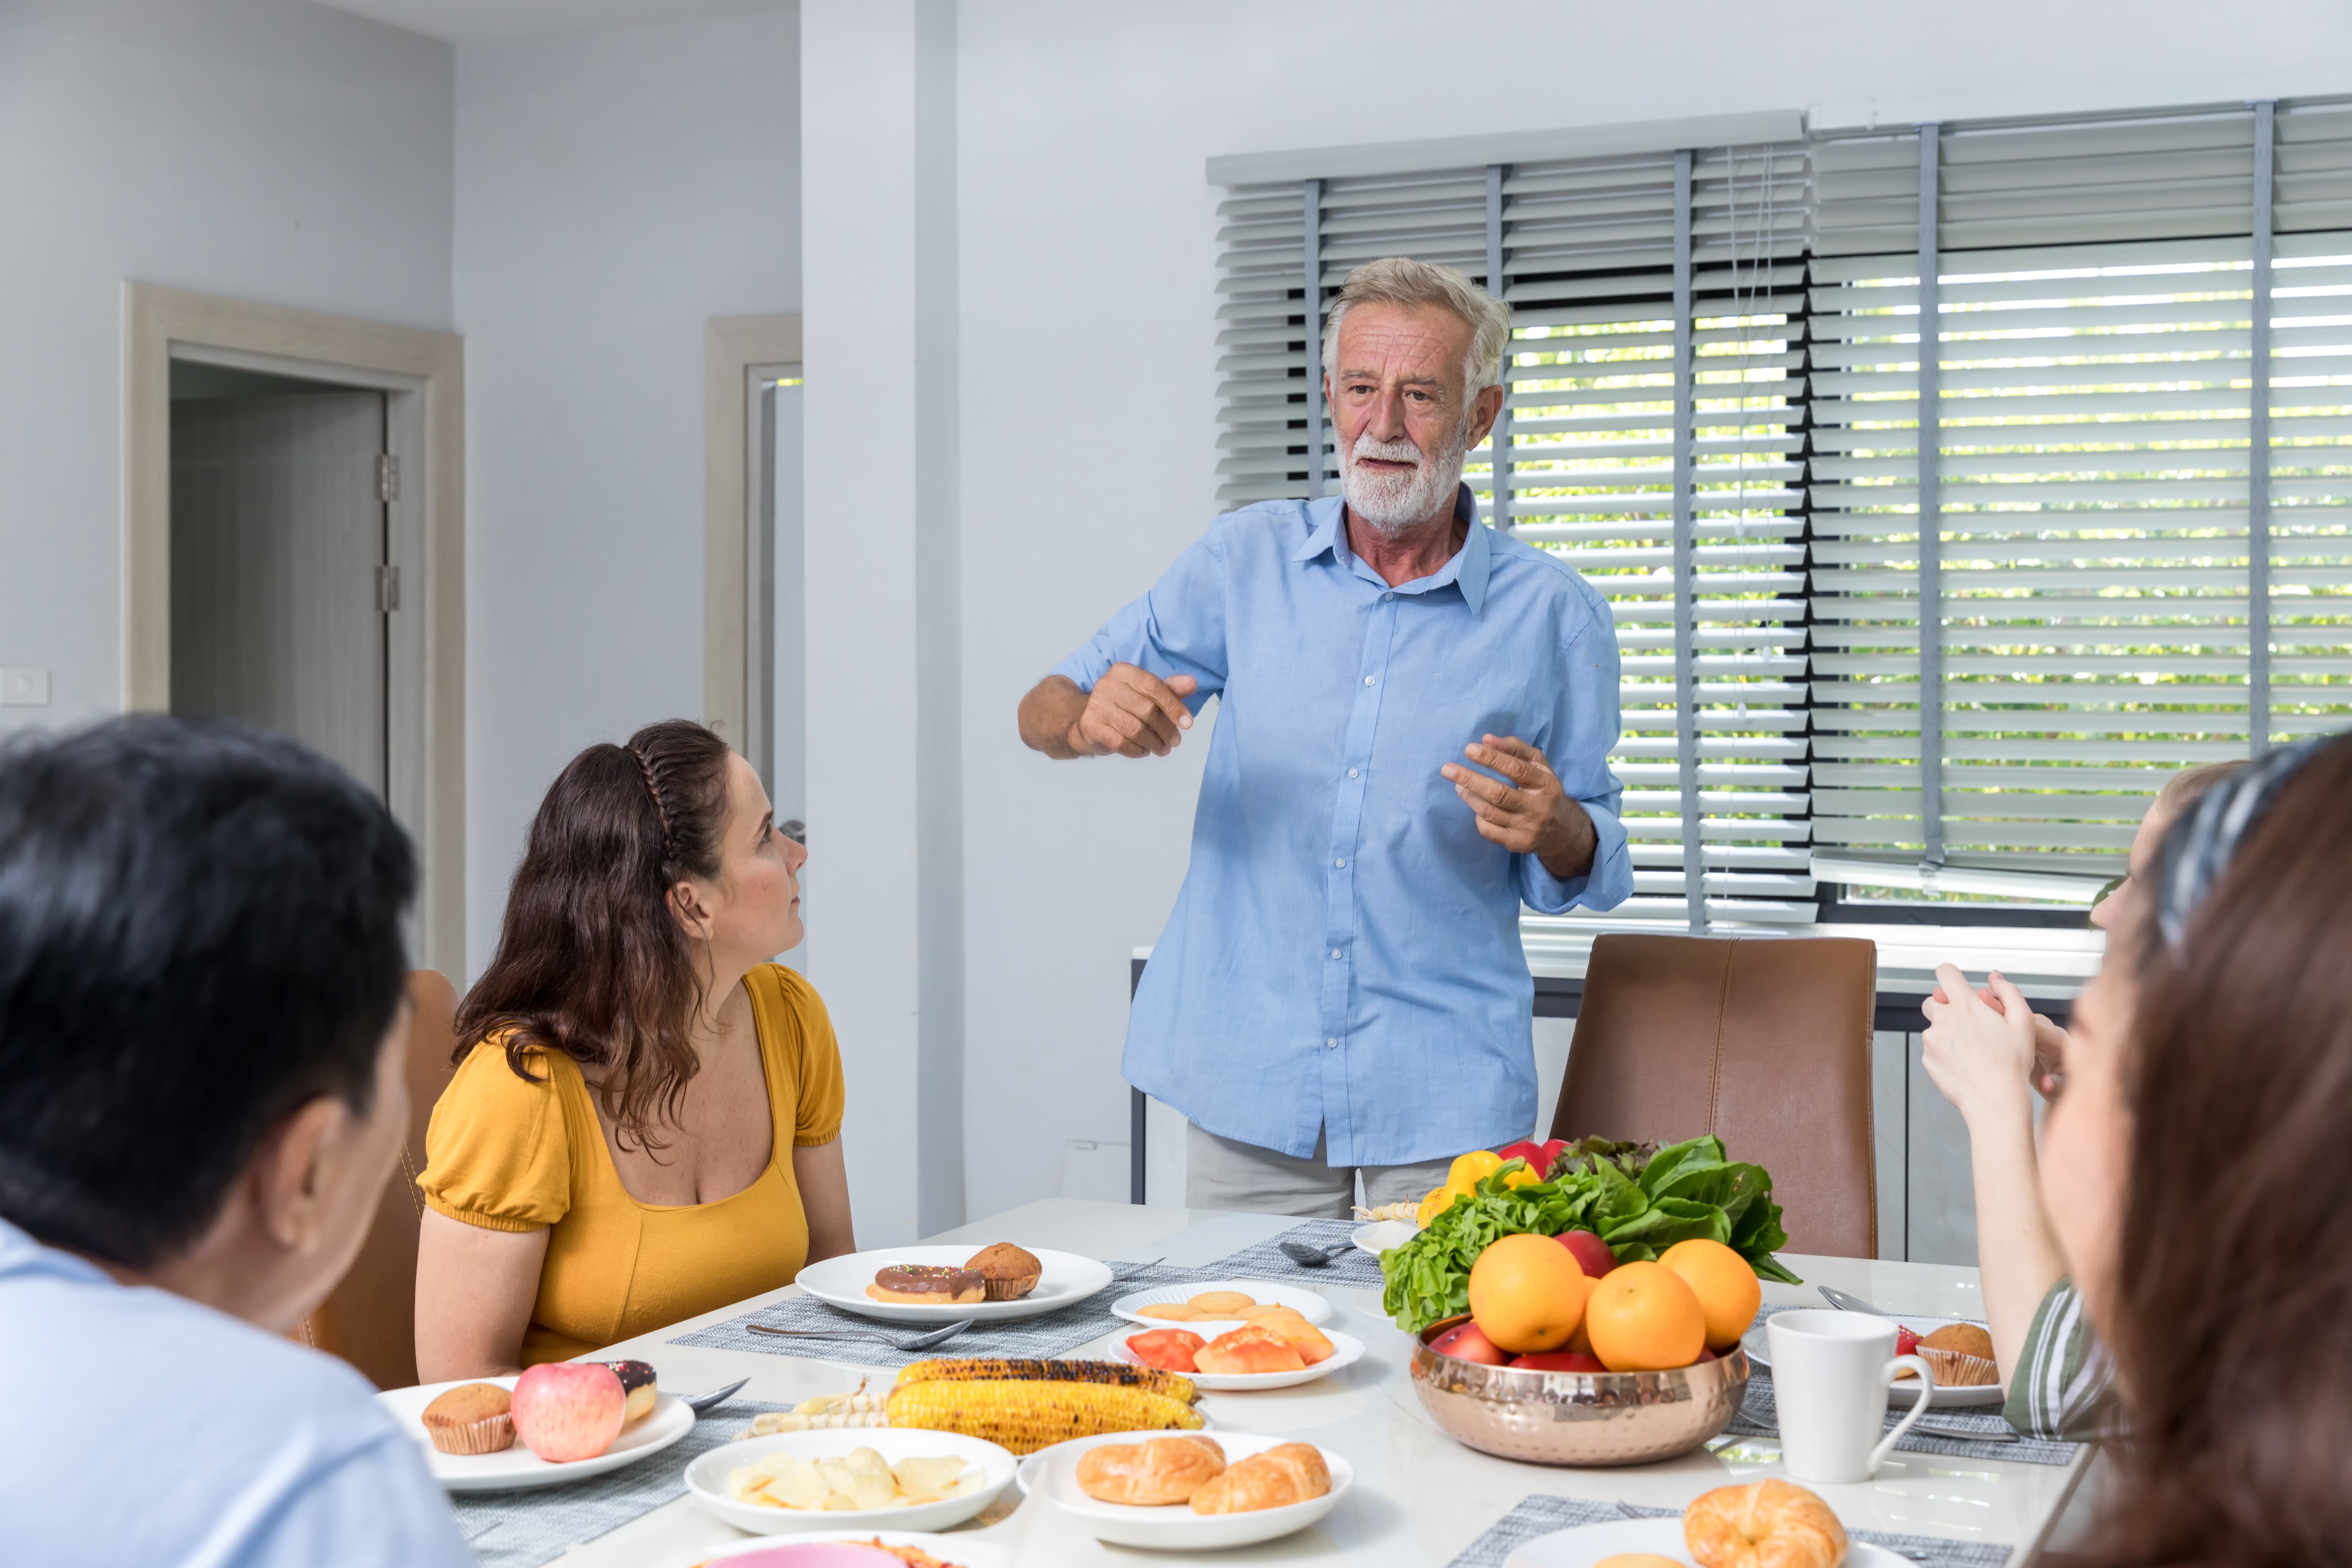 A senior man talking to his family over dinner in the dining room | Source: Shutterstock